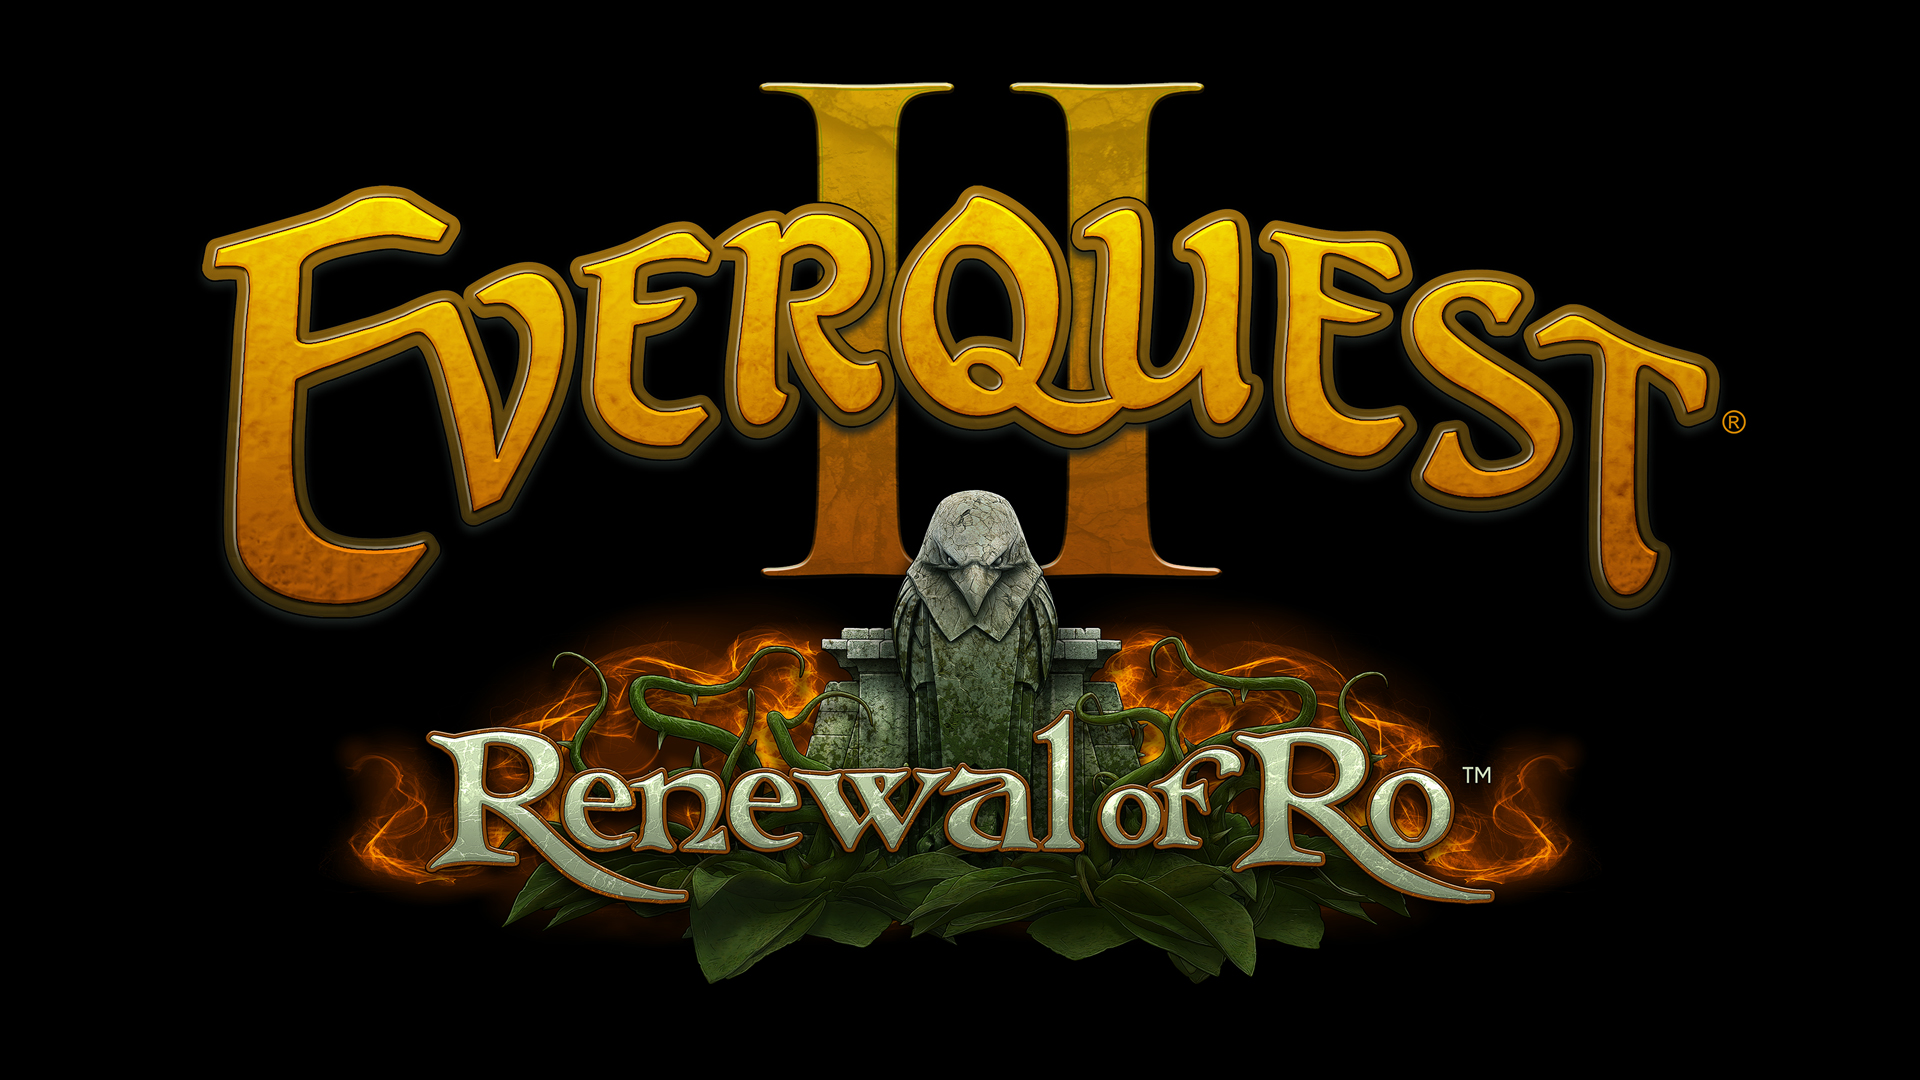 Everquest 2's 19th expansion Renewal of Ro.